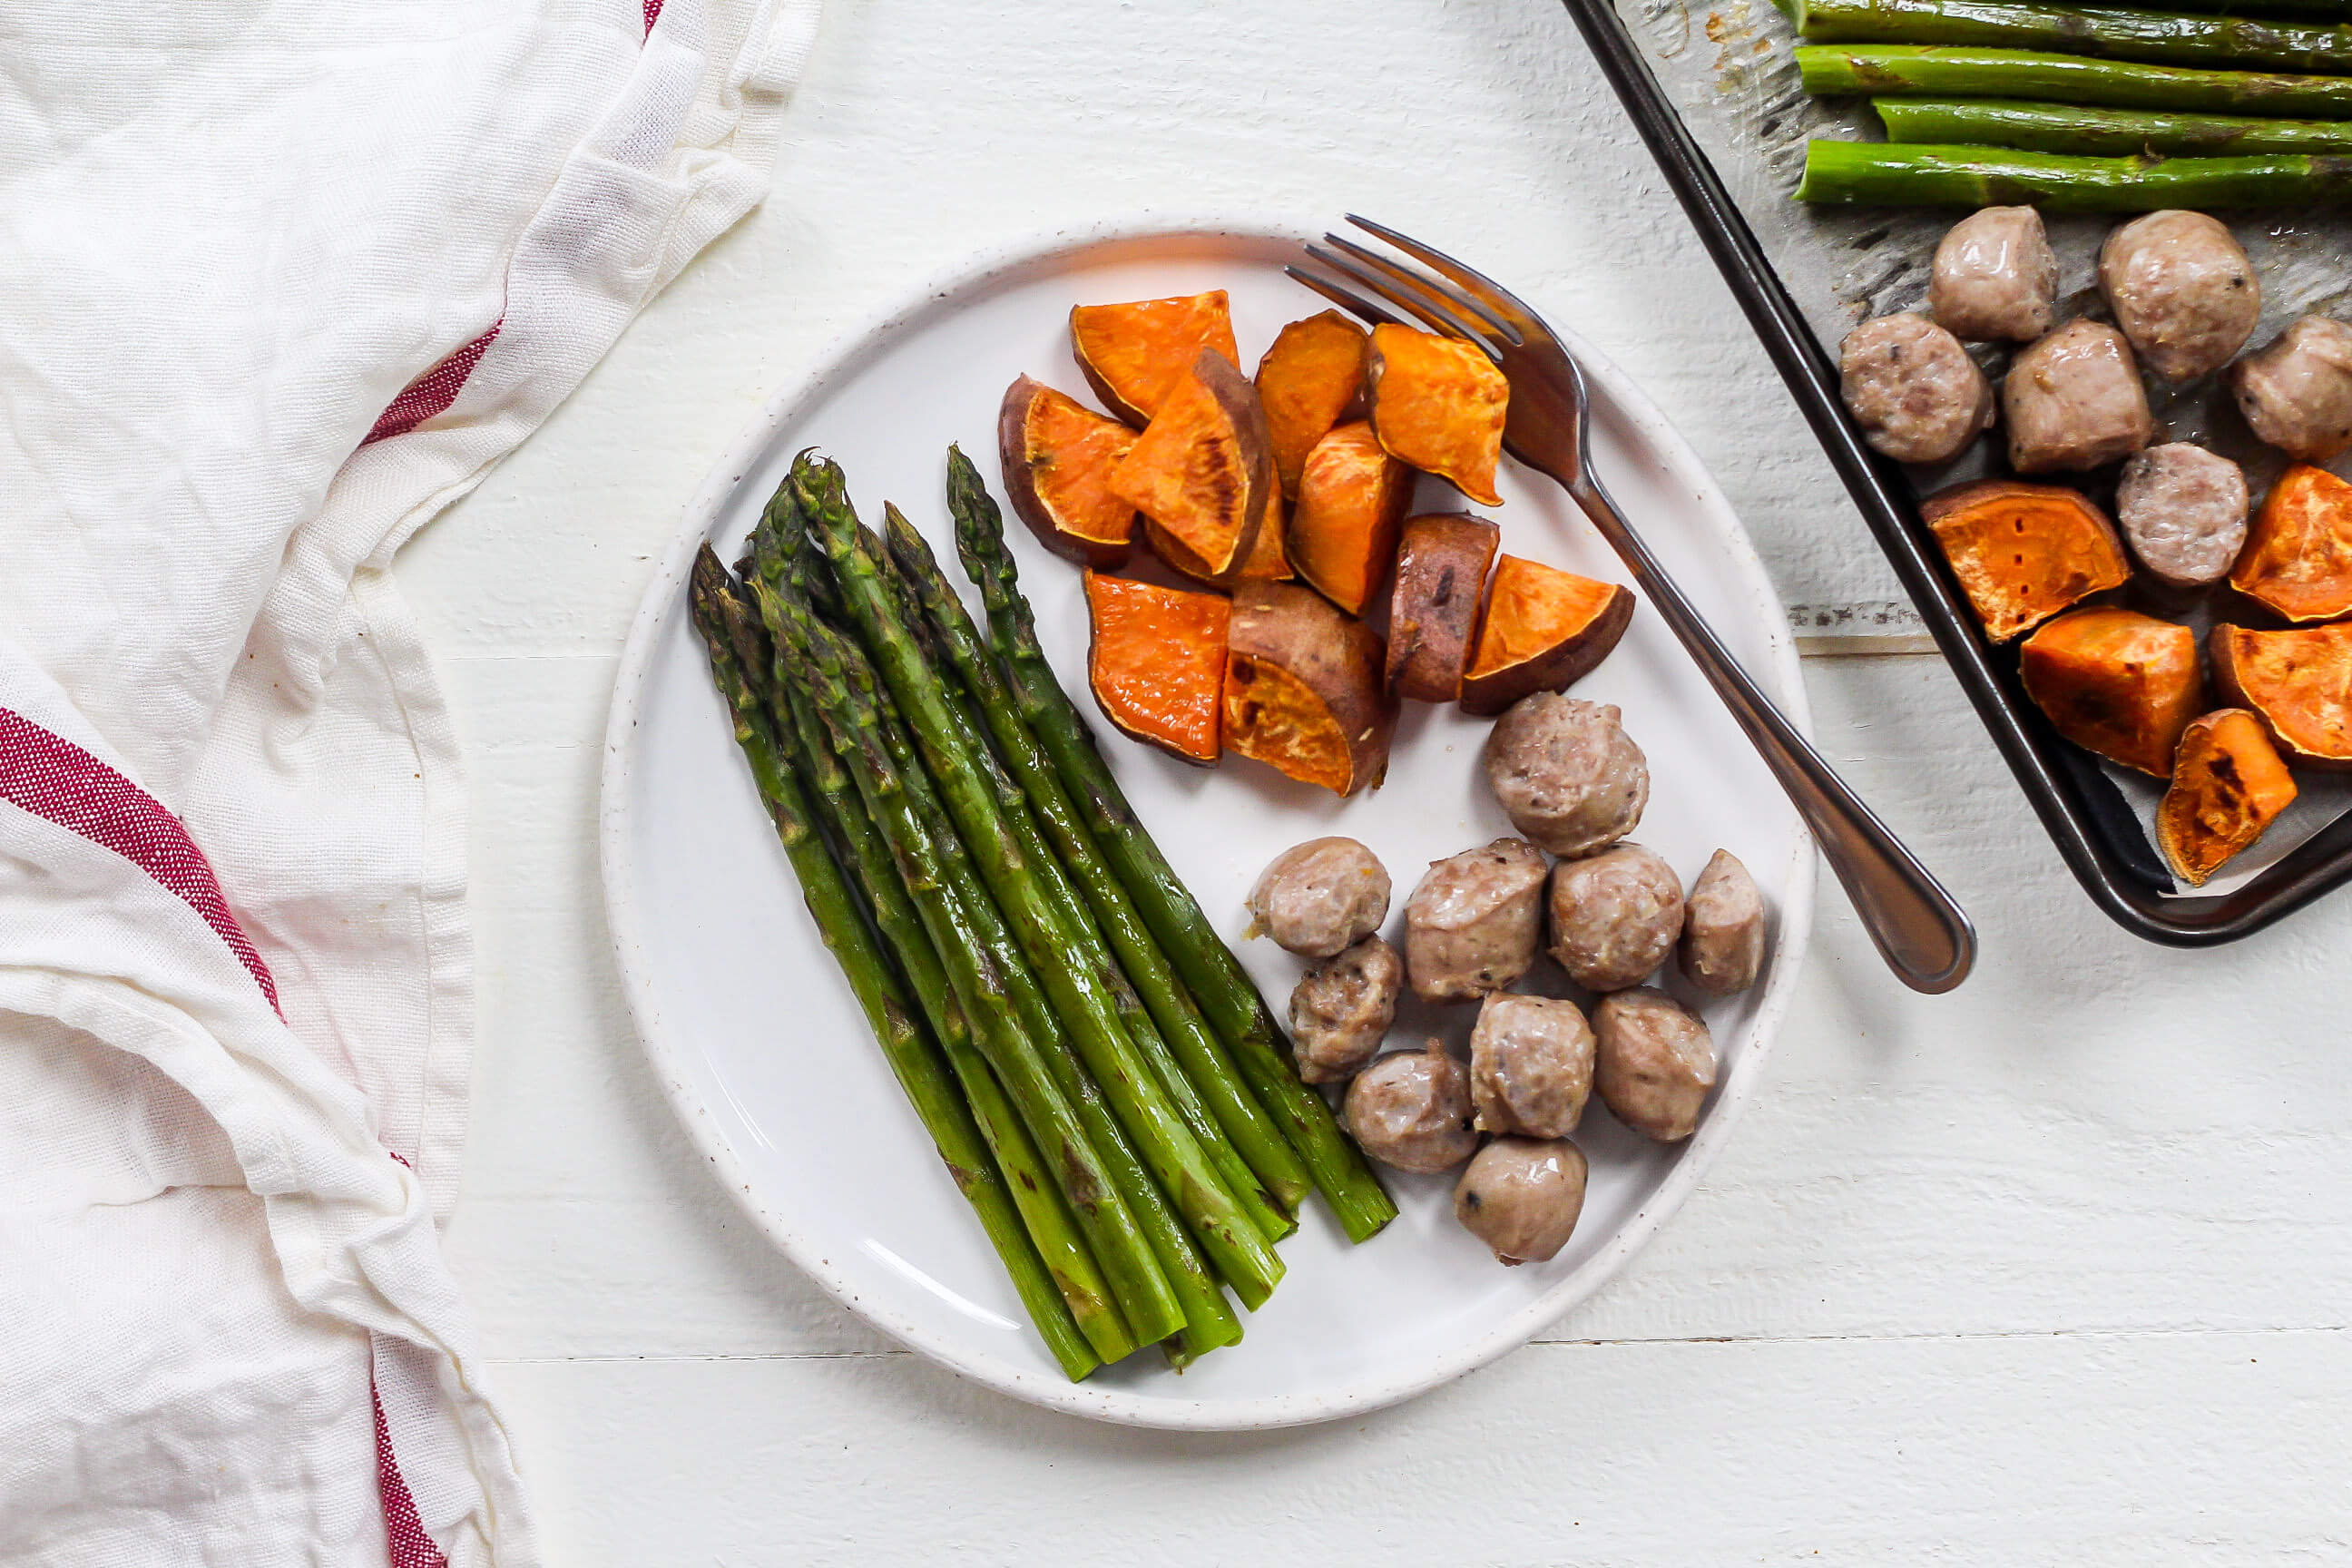 20 Meals Ideas for Kid-Friendly Meal Plans: One Pan Sausage, Sweet Potato & Asparagus